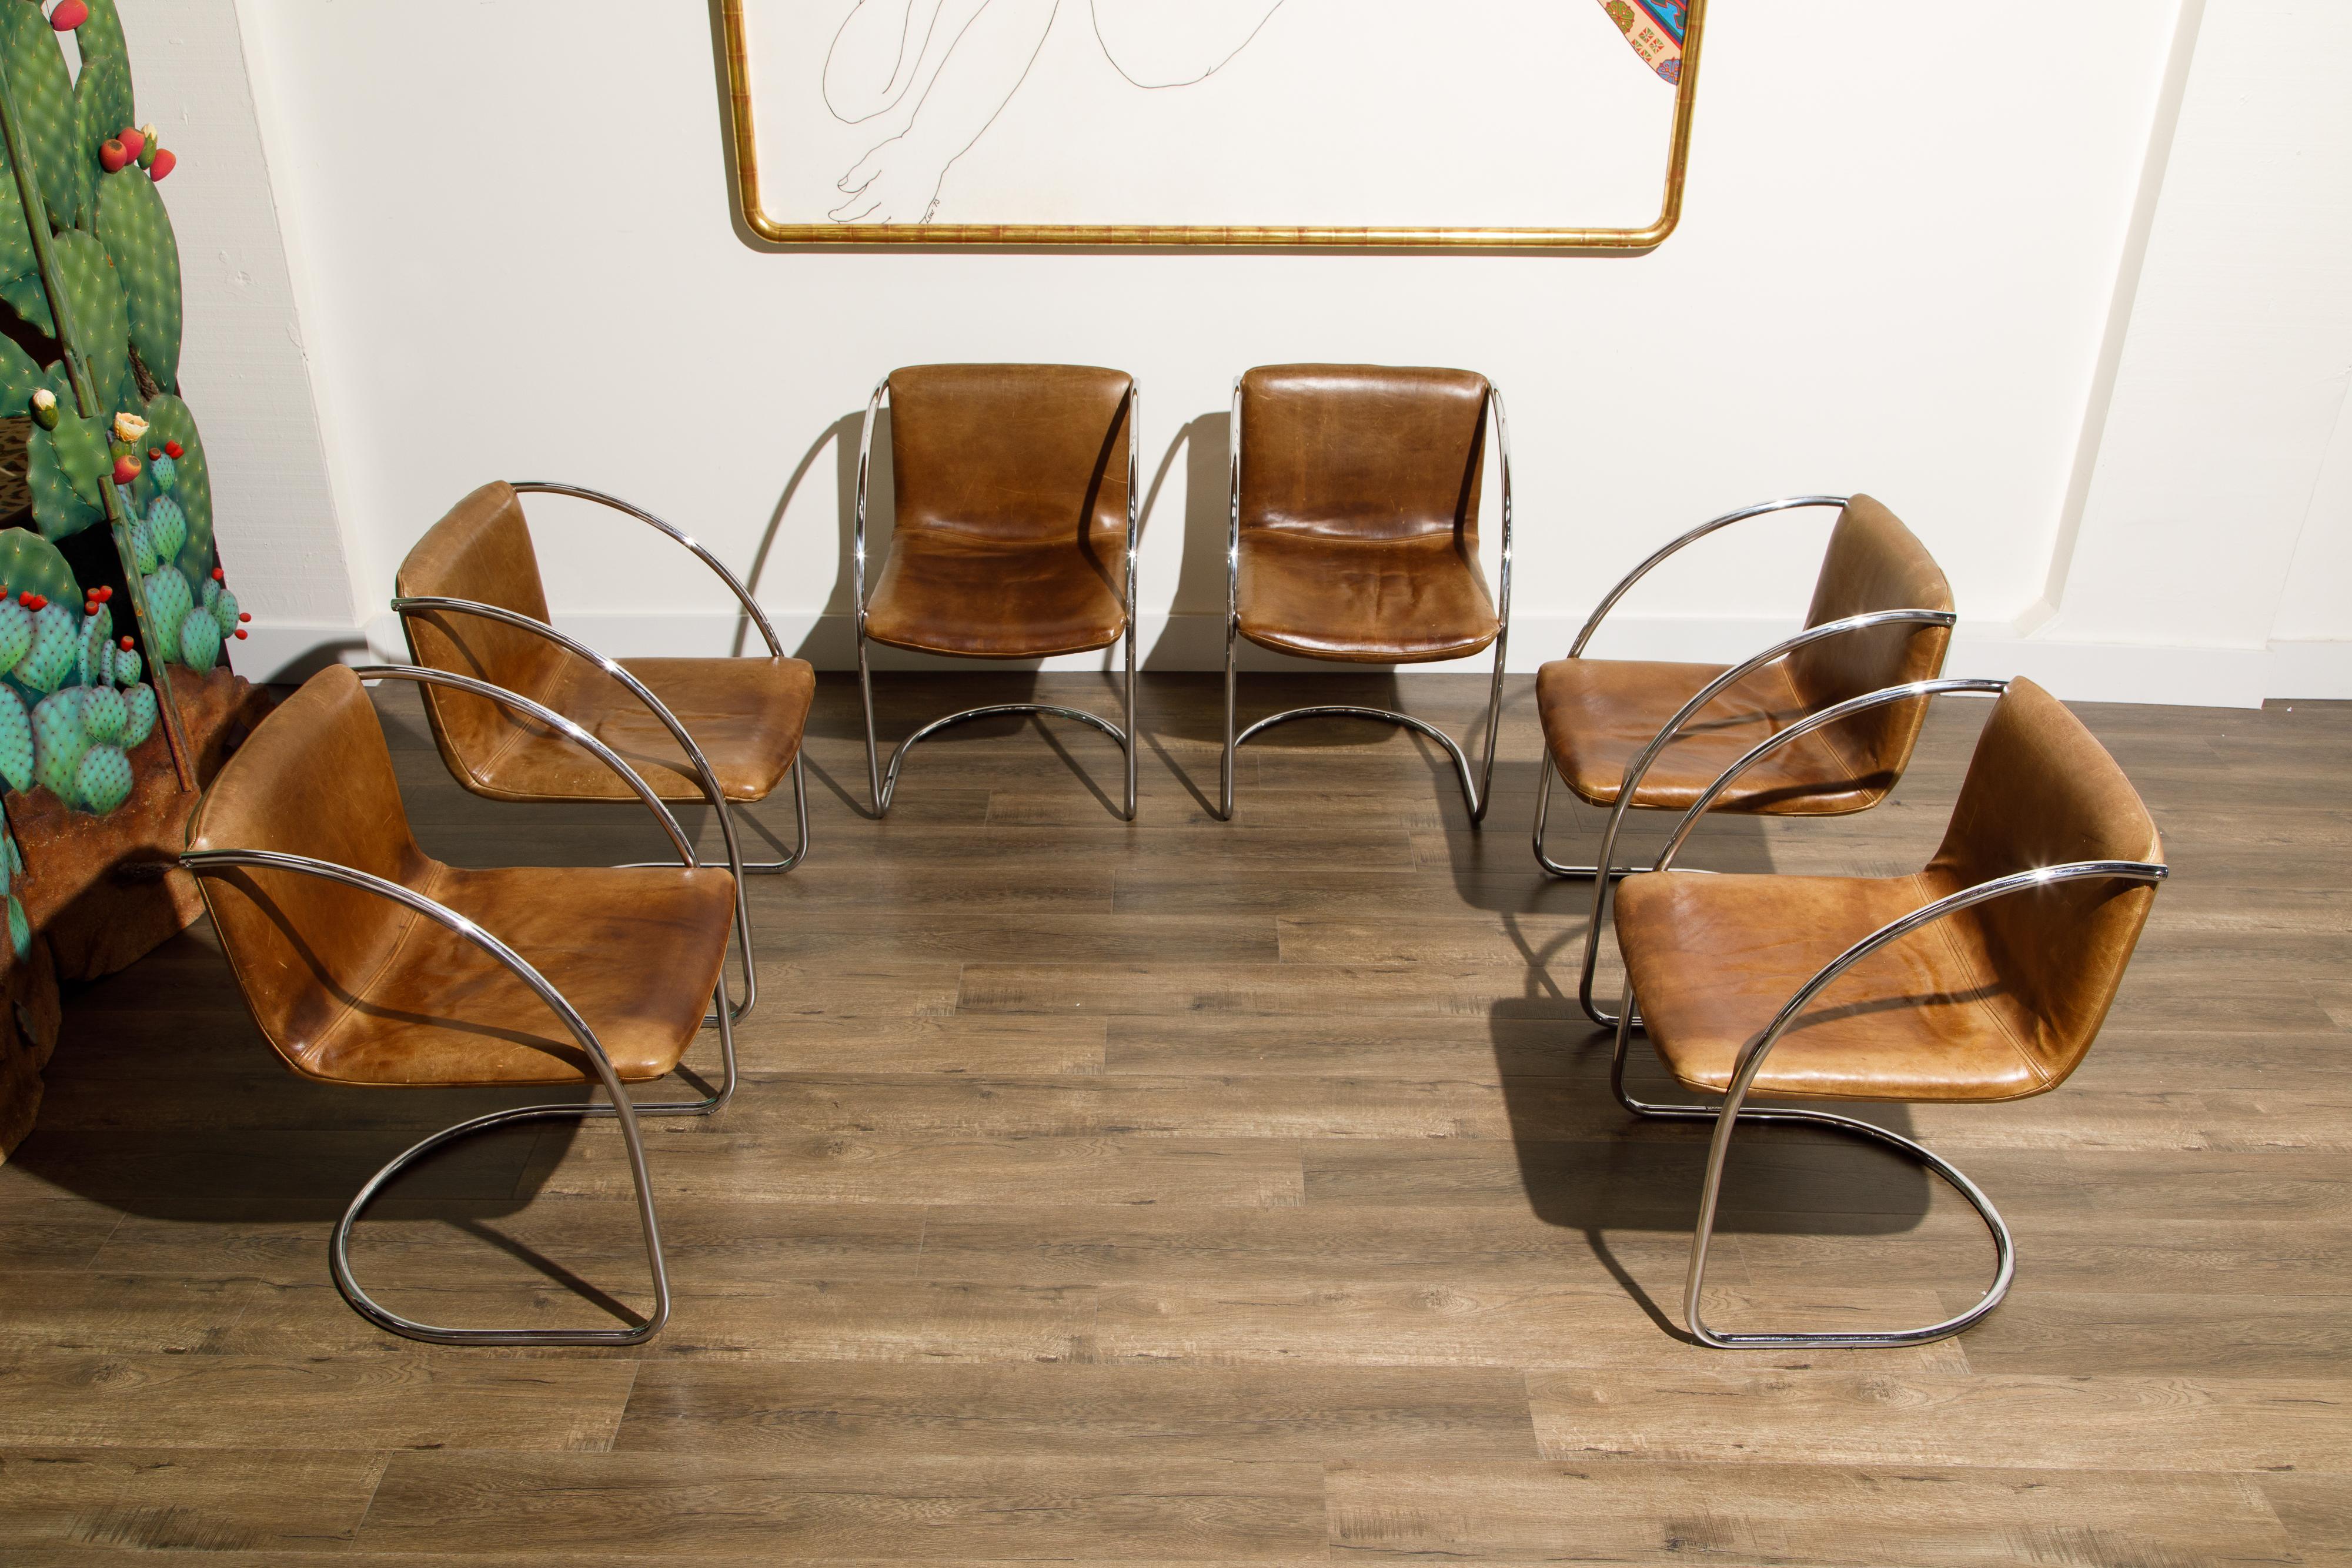 Steel 'Lens' Leather Chairs by Giovanni Offredi for Saporiti Italia, c. 1968, Signed